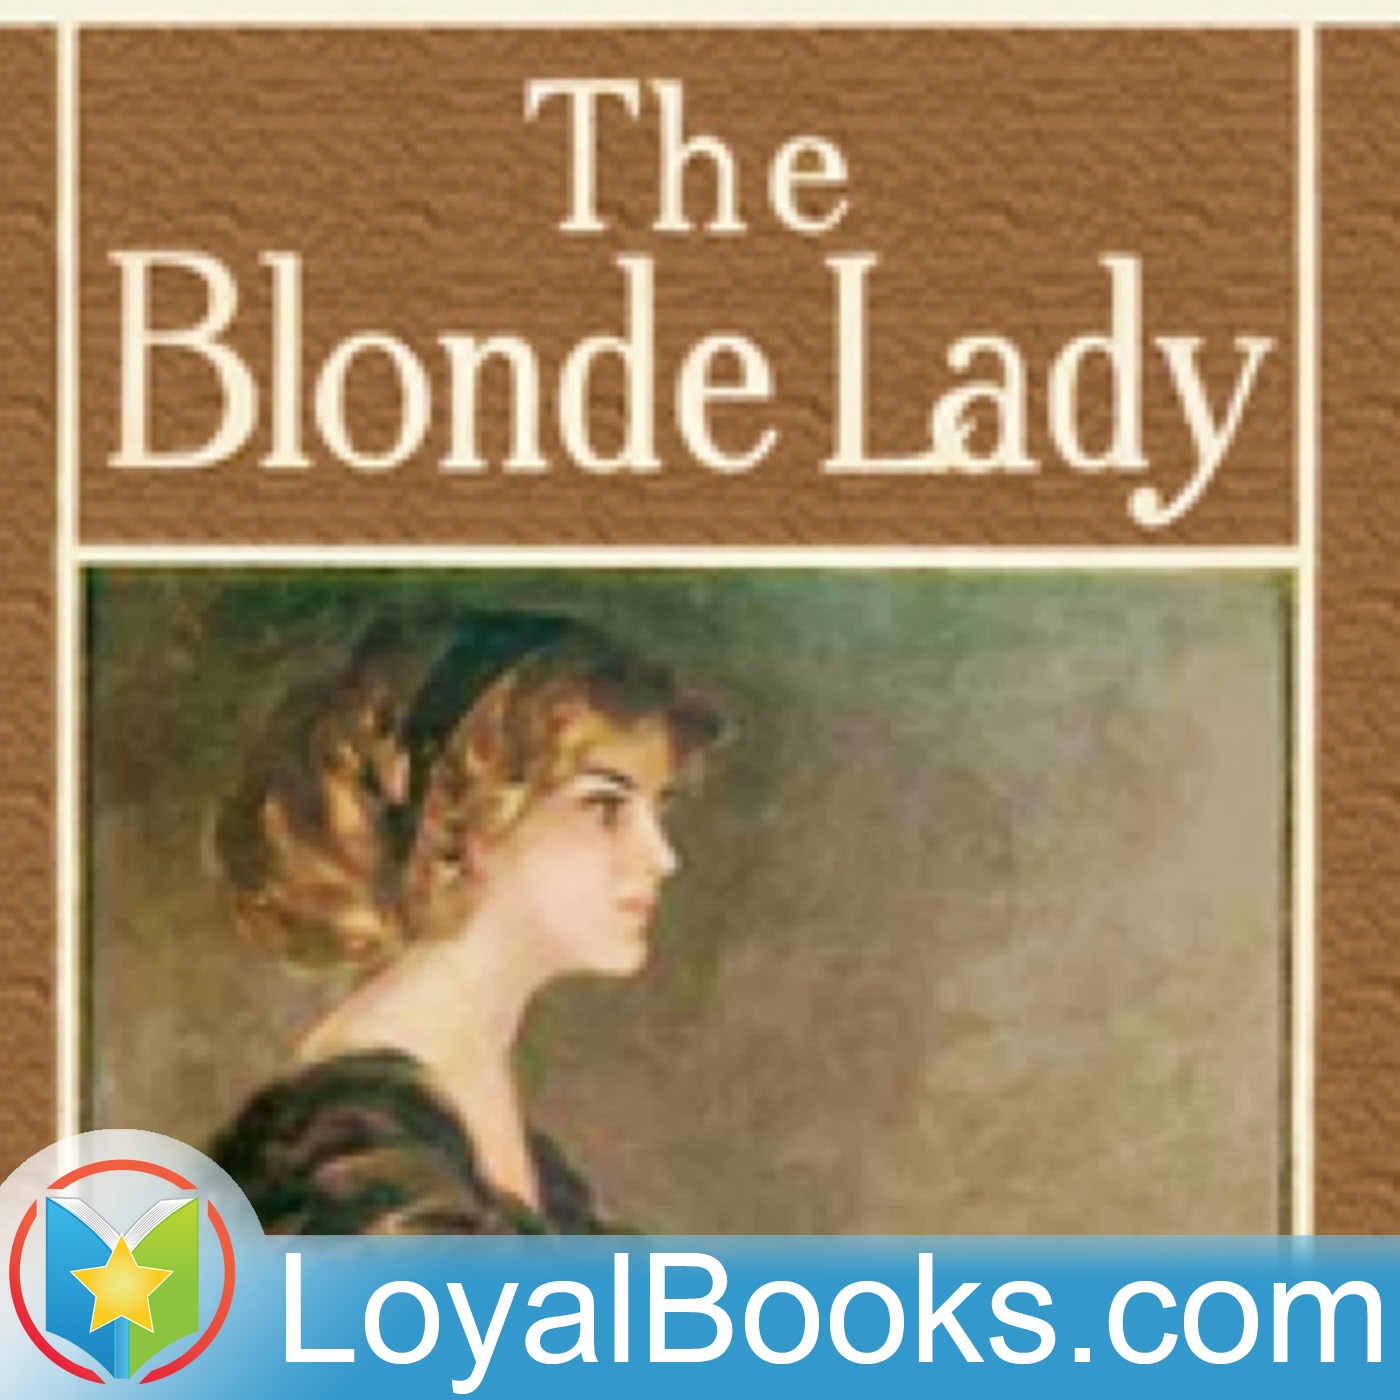 The Blonde Lady by Maurice Leblanc